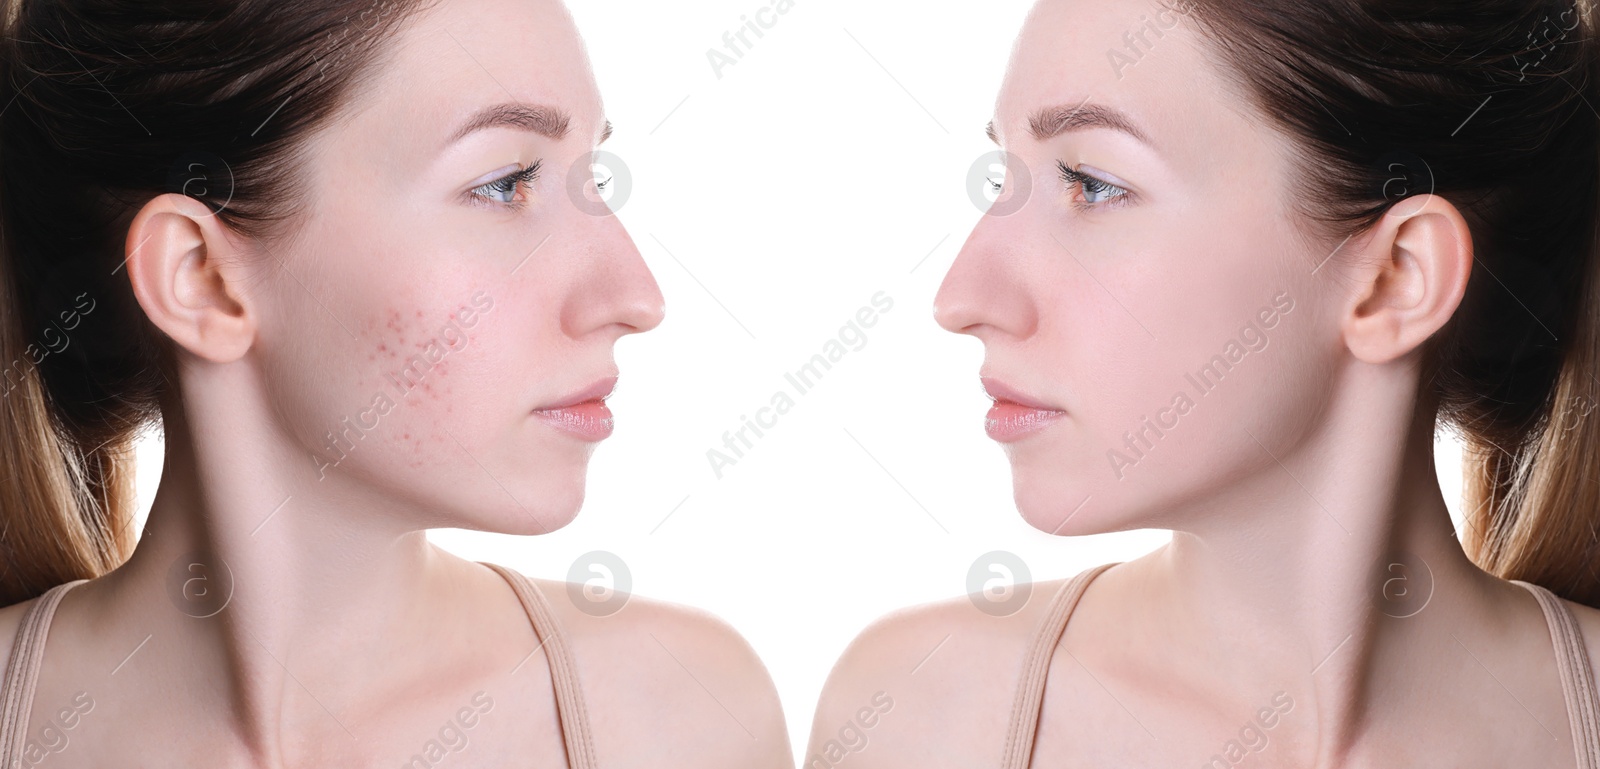 Image of Acne problem. Young woman before and after treatment on white background, collage of photos